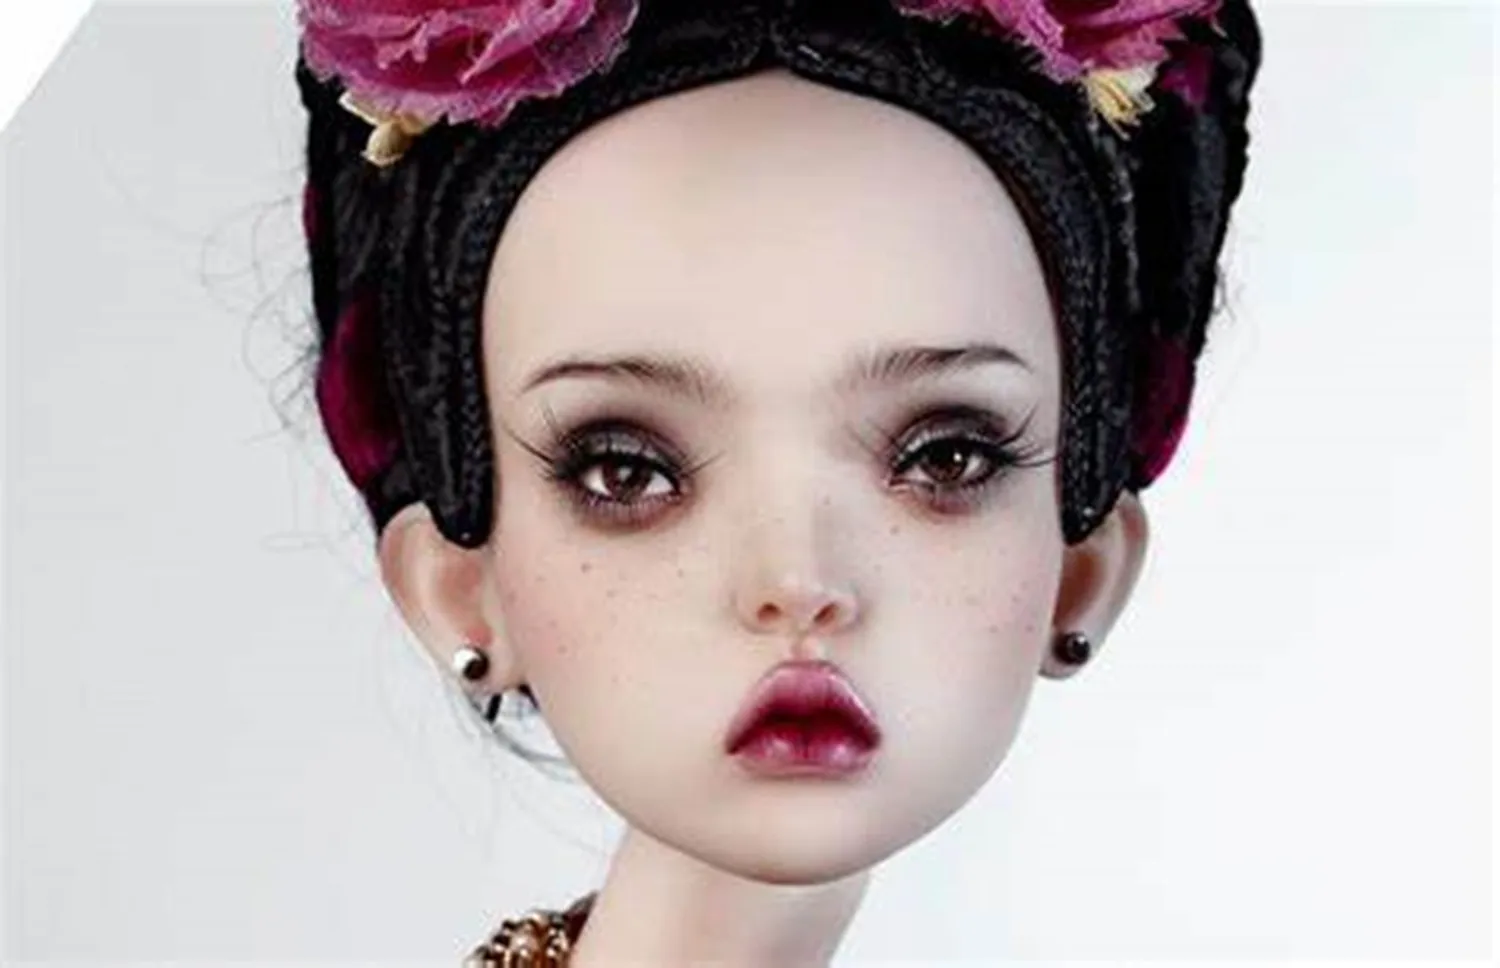 Details about   BJD 1/4 MSD Recast Doll Russian  Normal Skin Tone With Face Makeup 